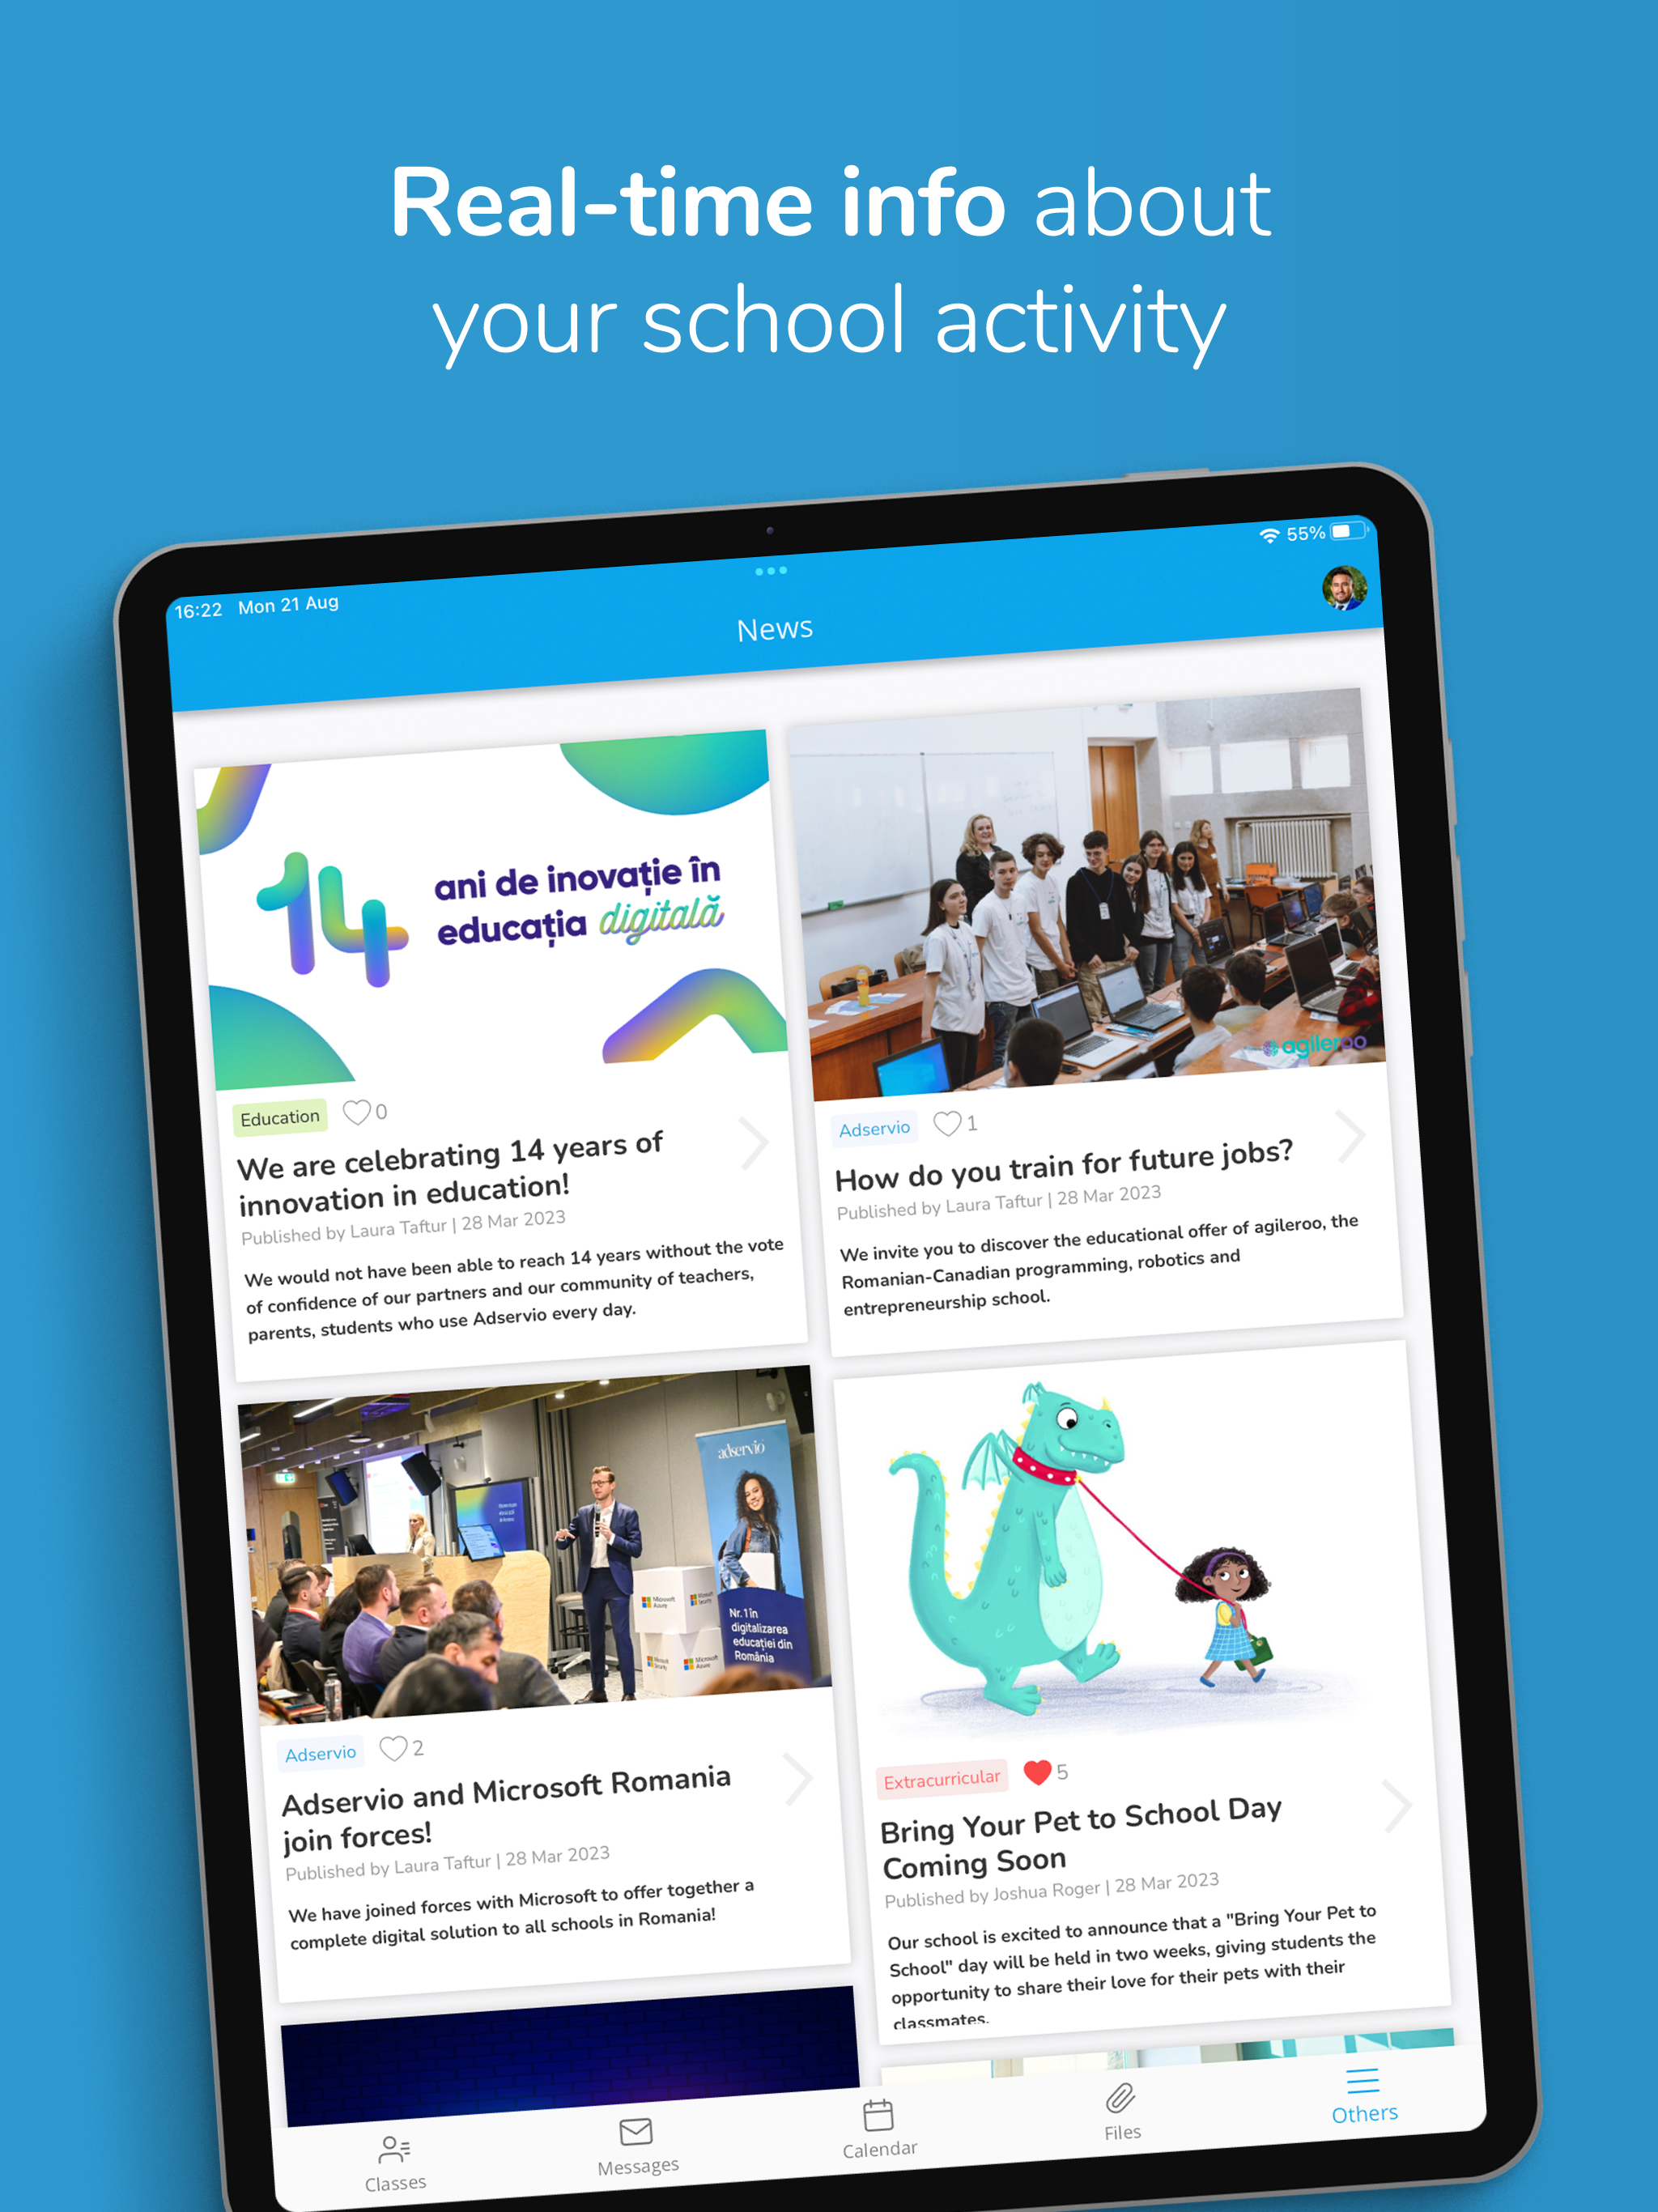 It's easier than ever to post important school information about extracurricular events, school trips, contests or other important information for parents and students.